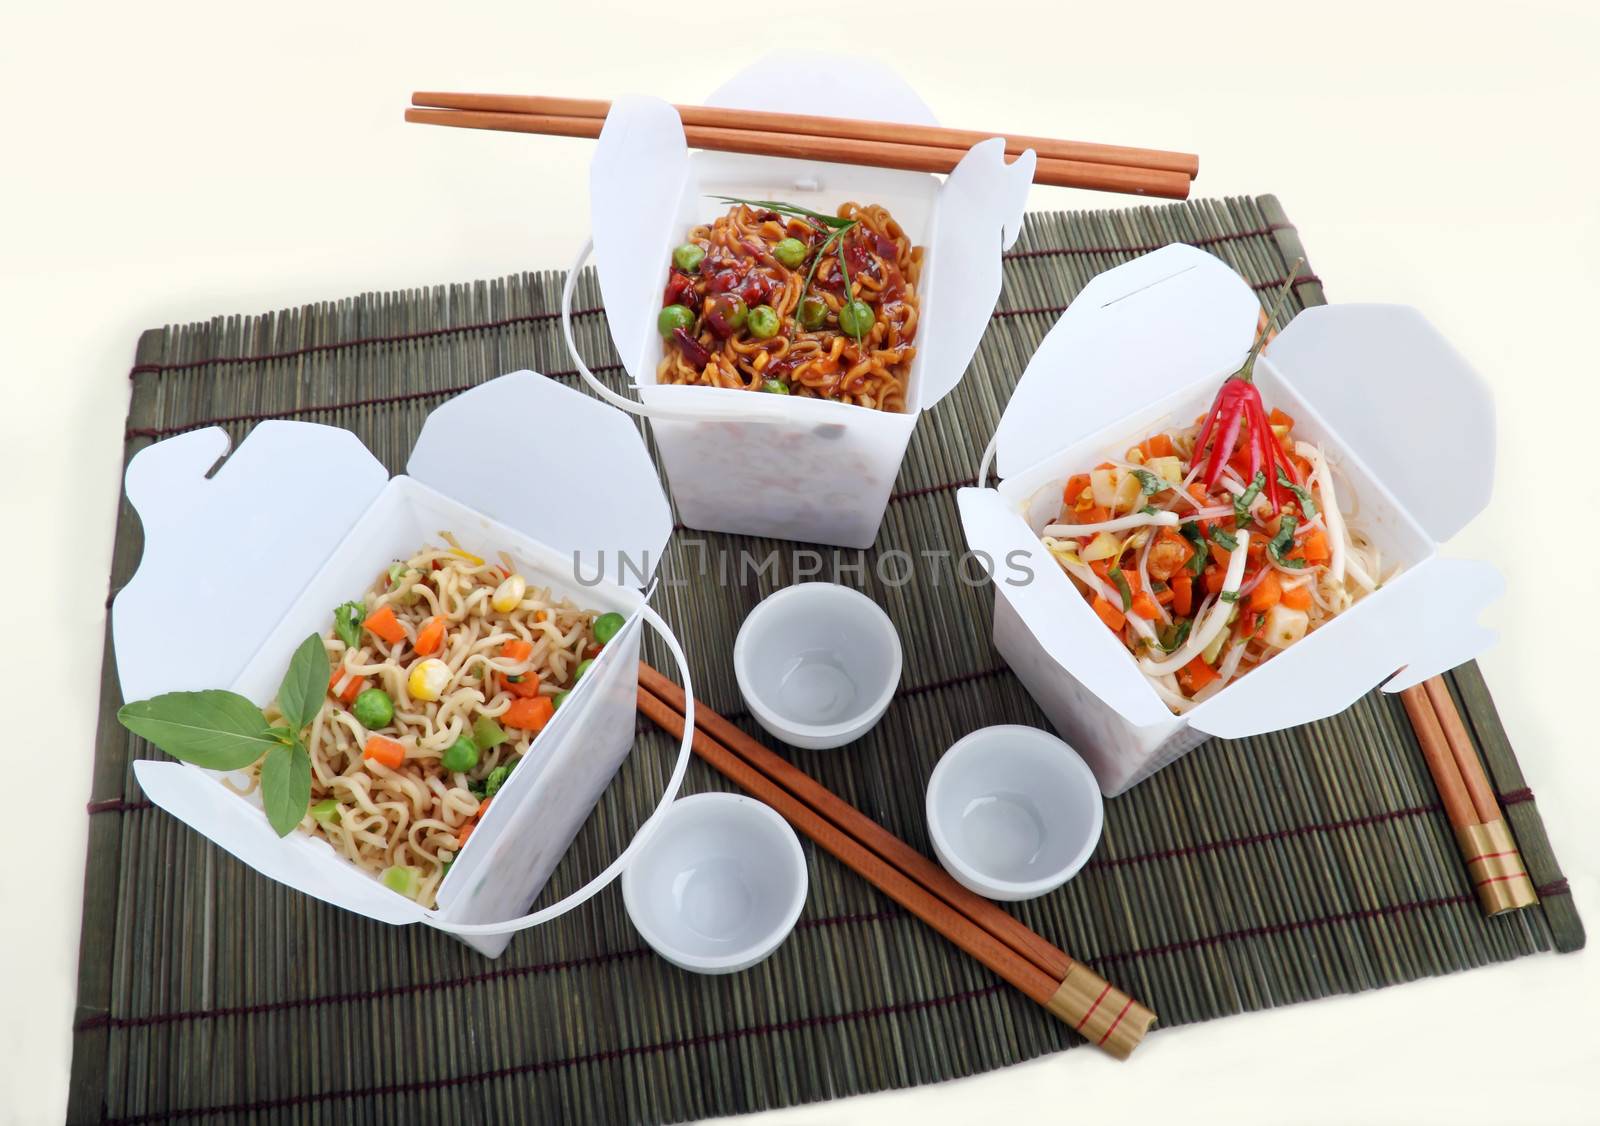 BBQ egg noodles, vegetables noodles and chili rice noodle vermiceli in take away containers.